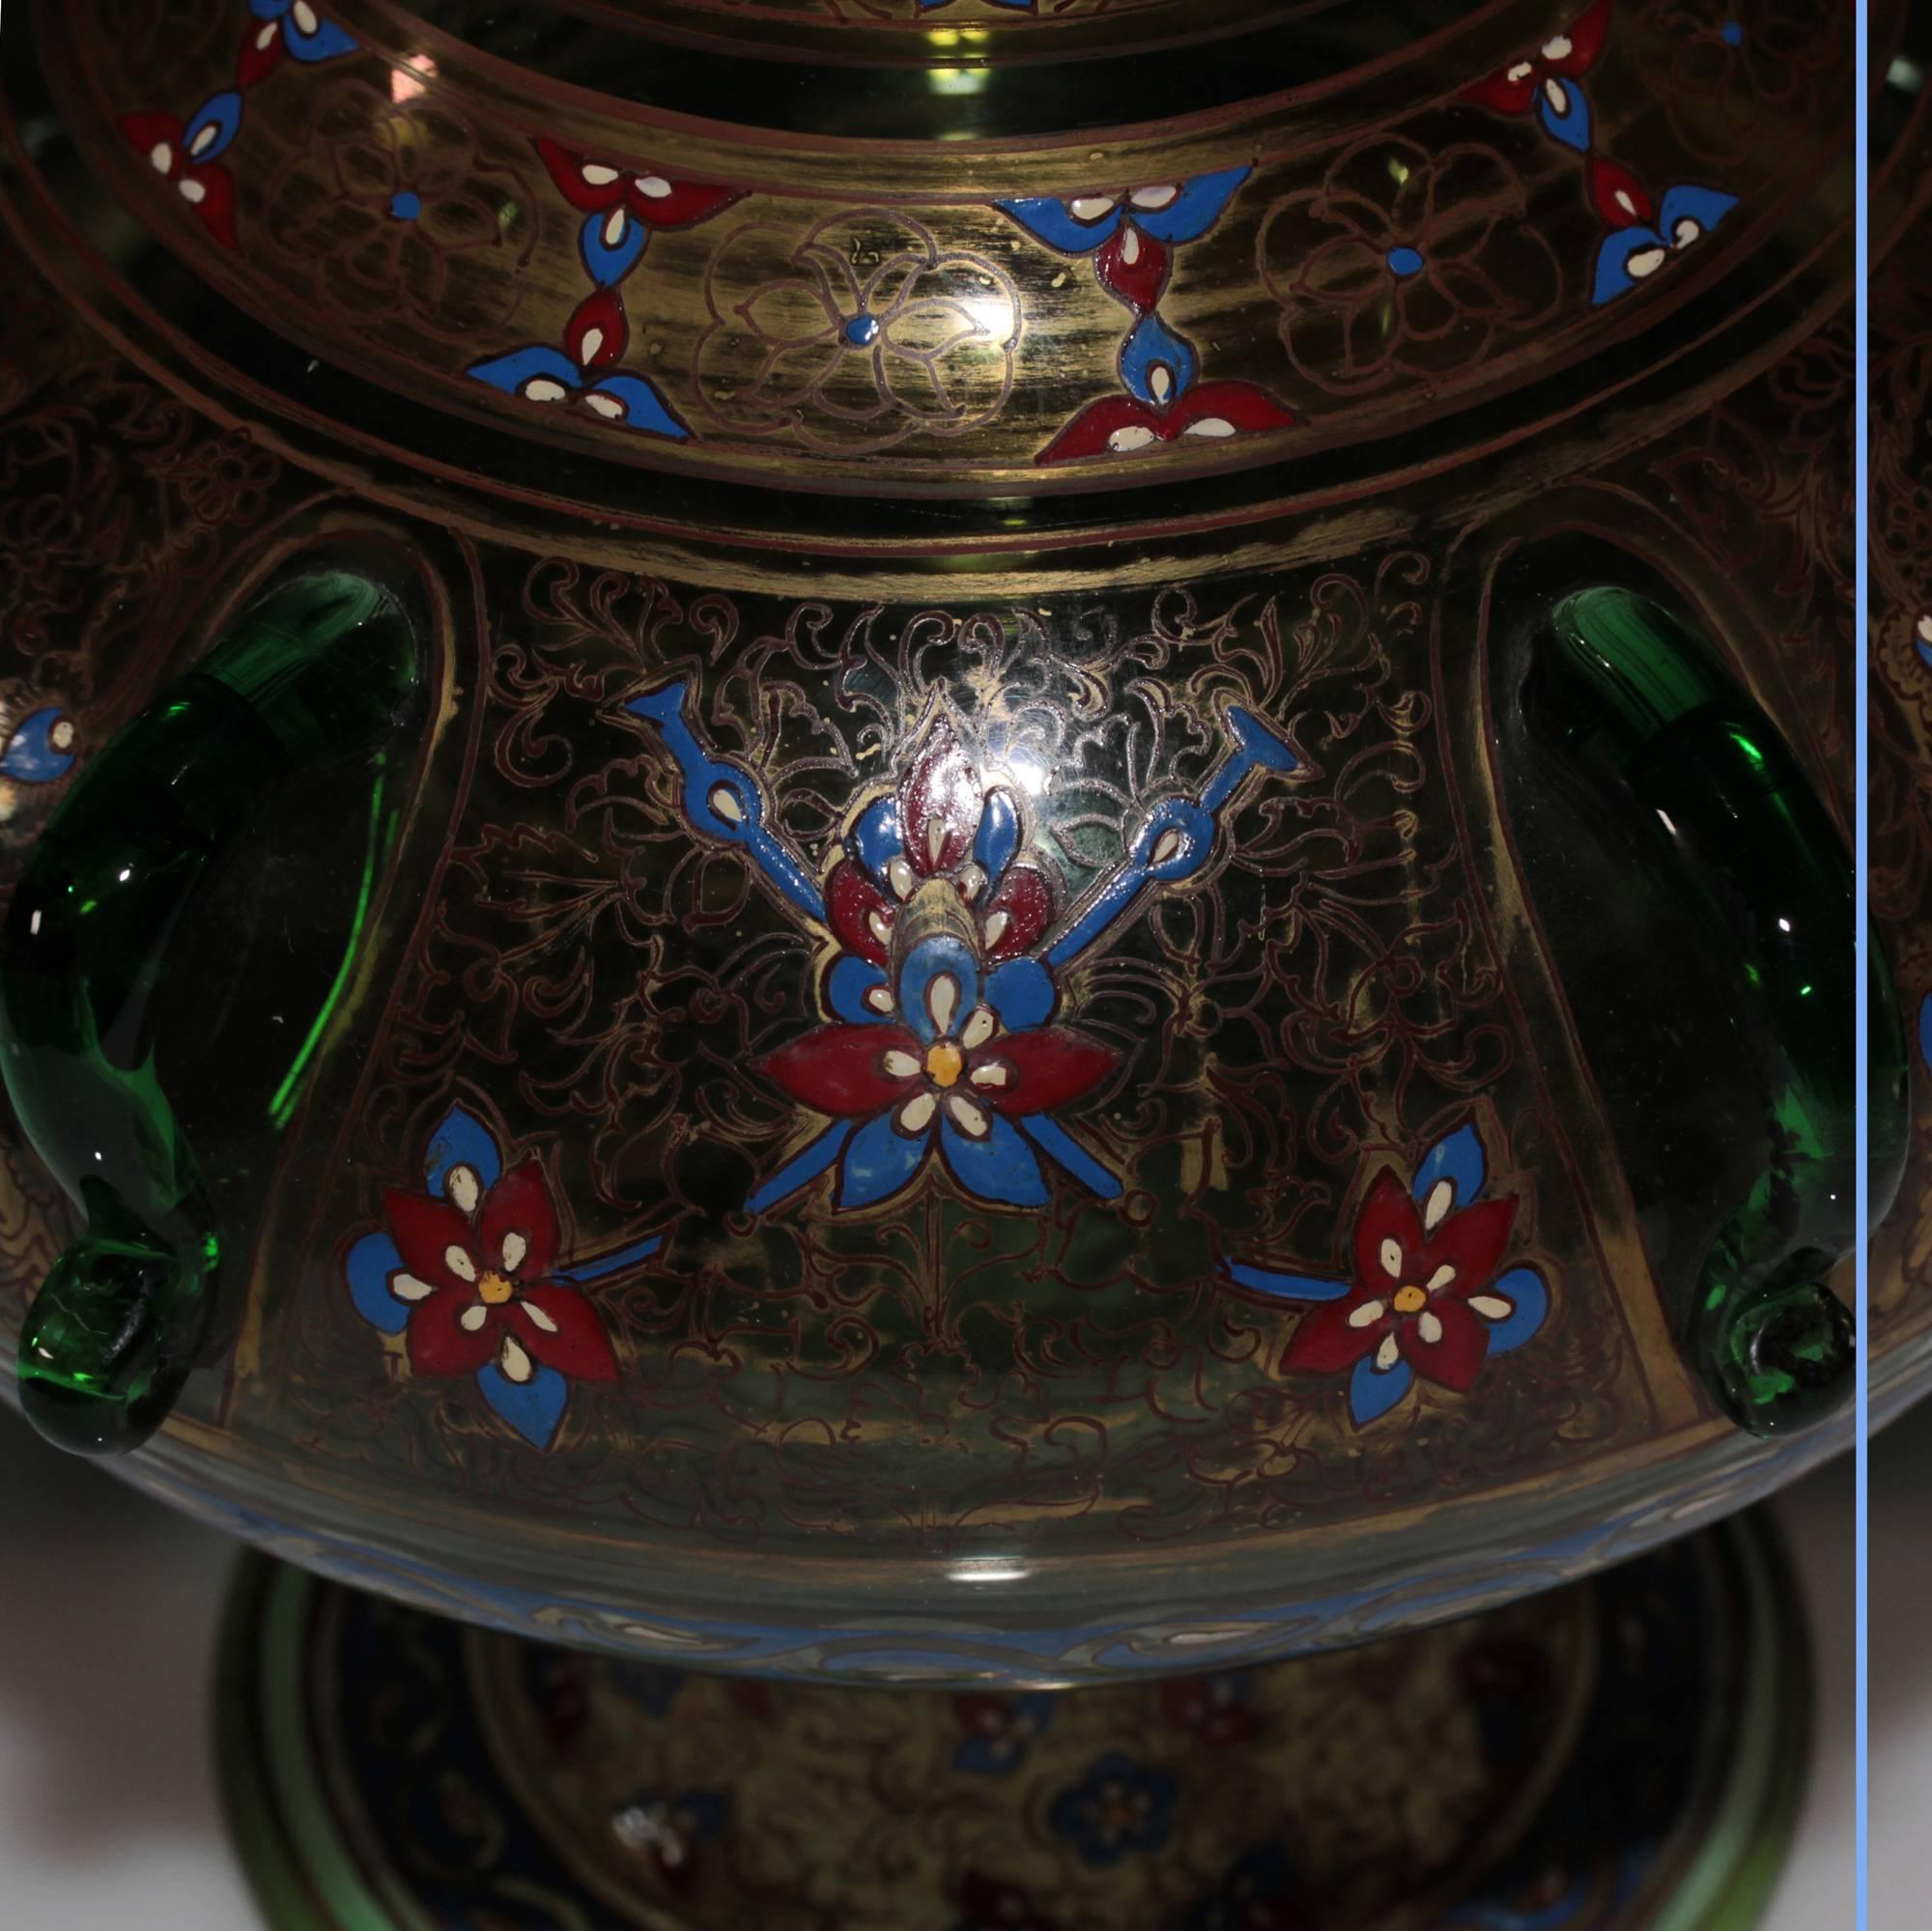 French Pair of Polychrome Enameled Glass Mosque Lamps, P.-J. Brocard